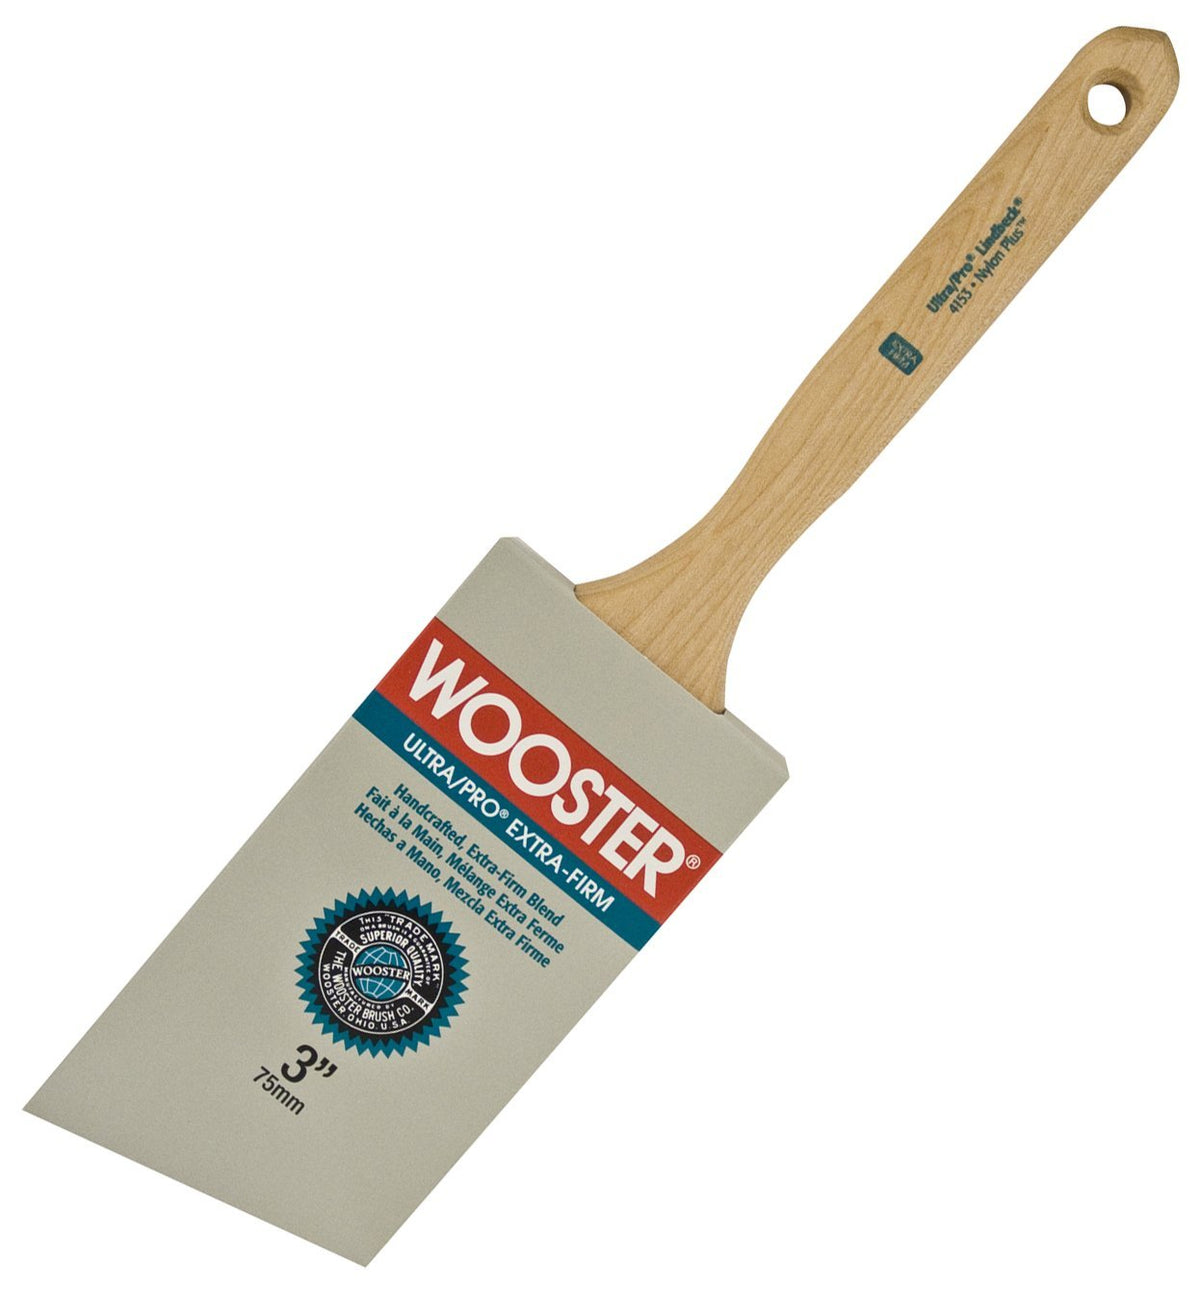 Wooster 4153-3 Extra Firm Angle Sash Paint Brush, 3"